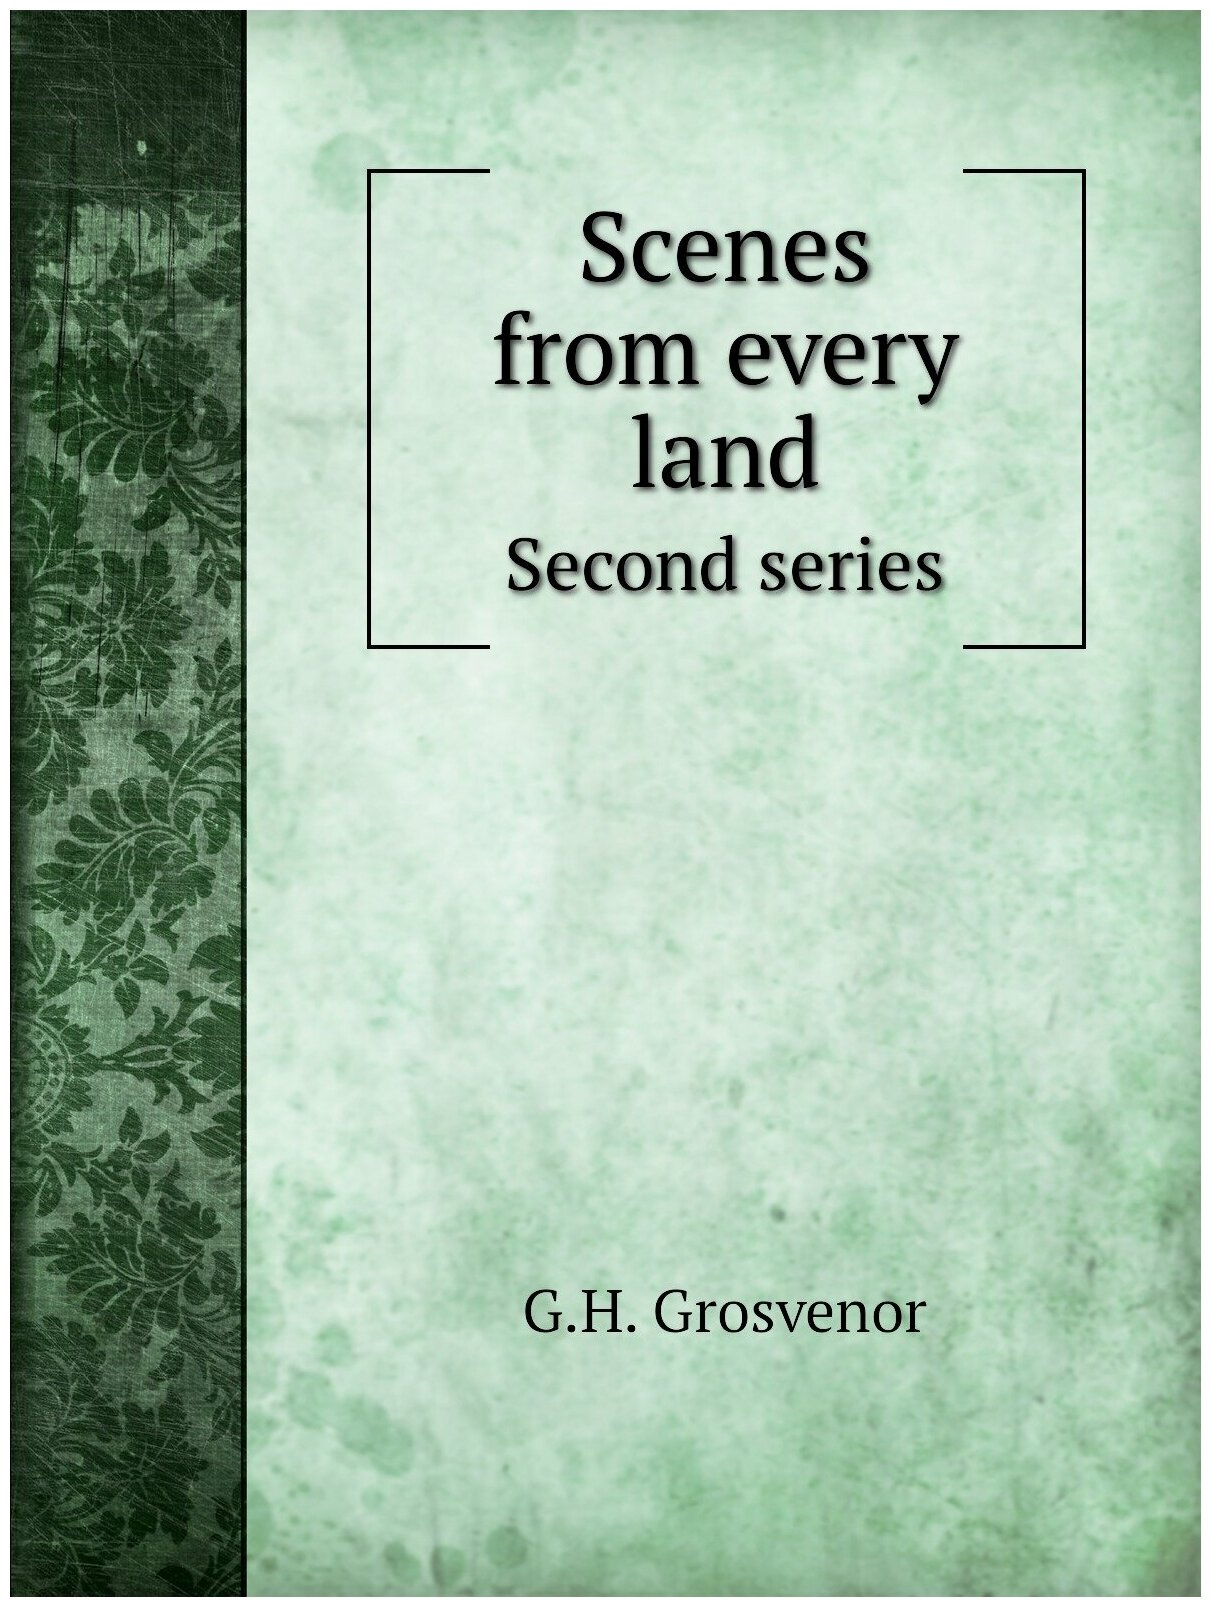 Scenes from every land. Second series